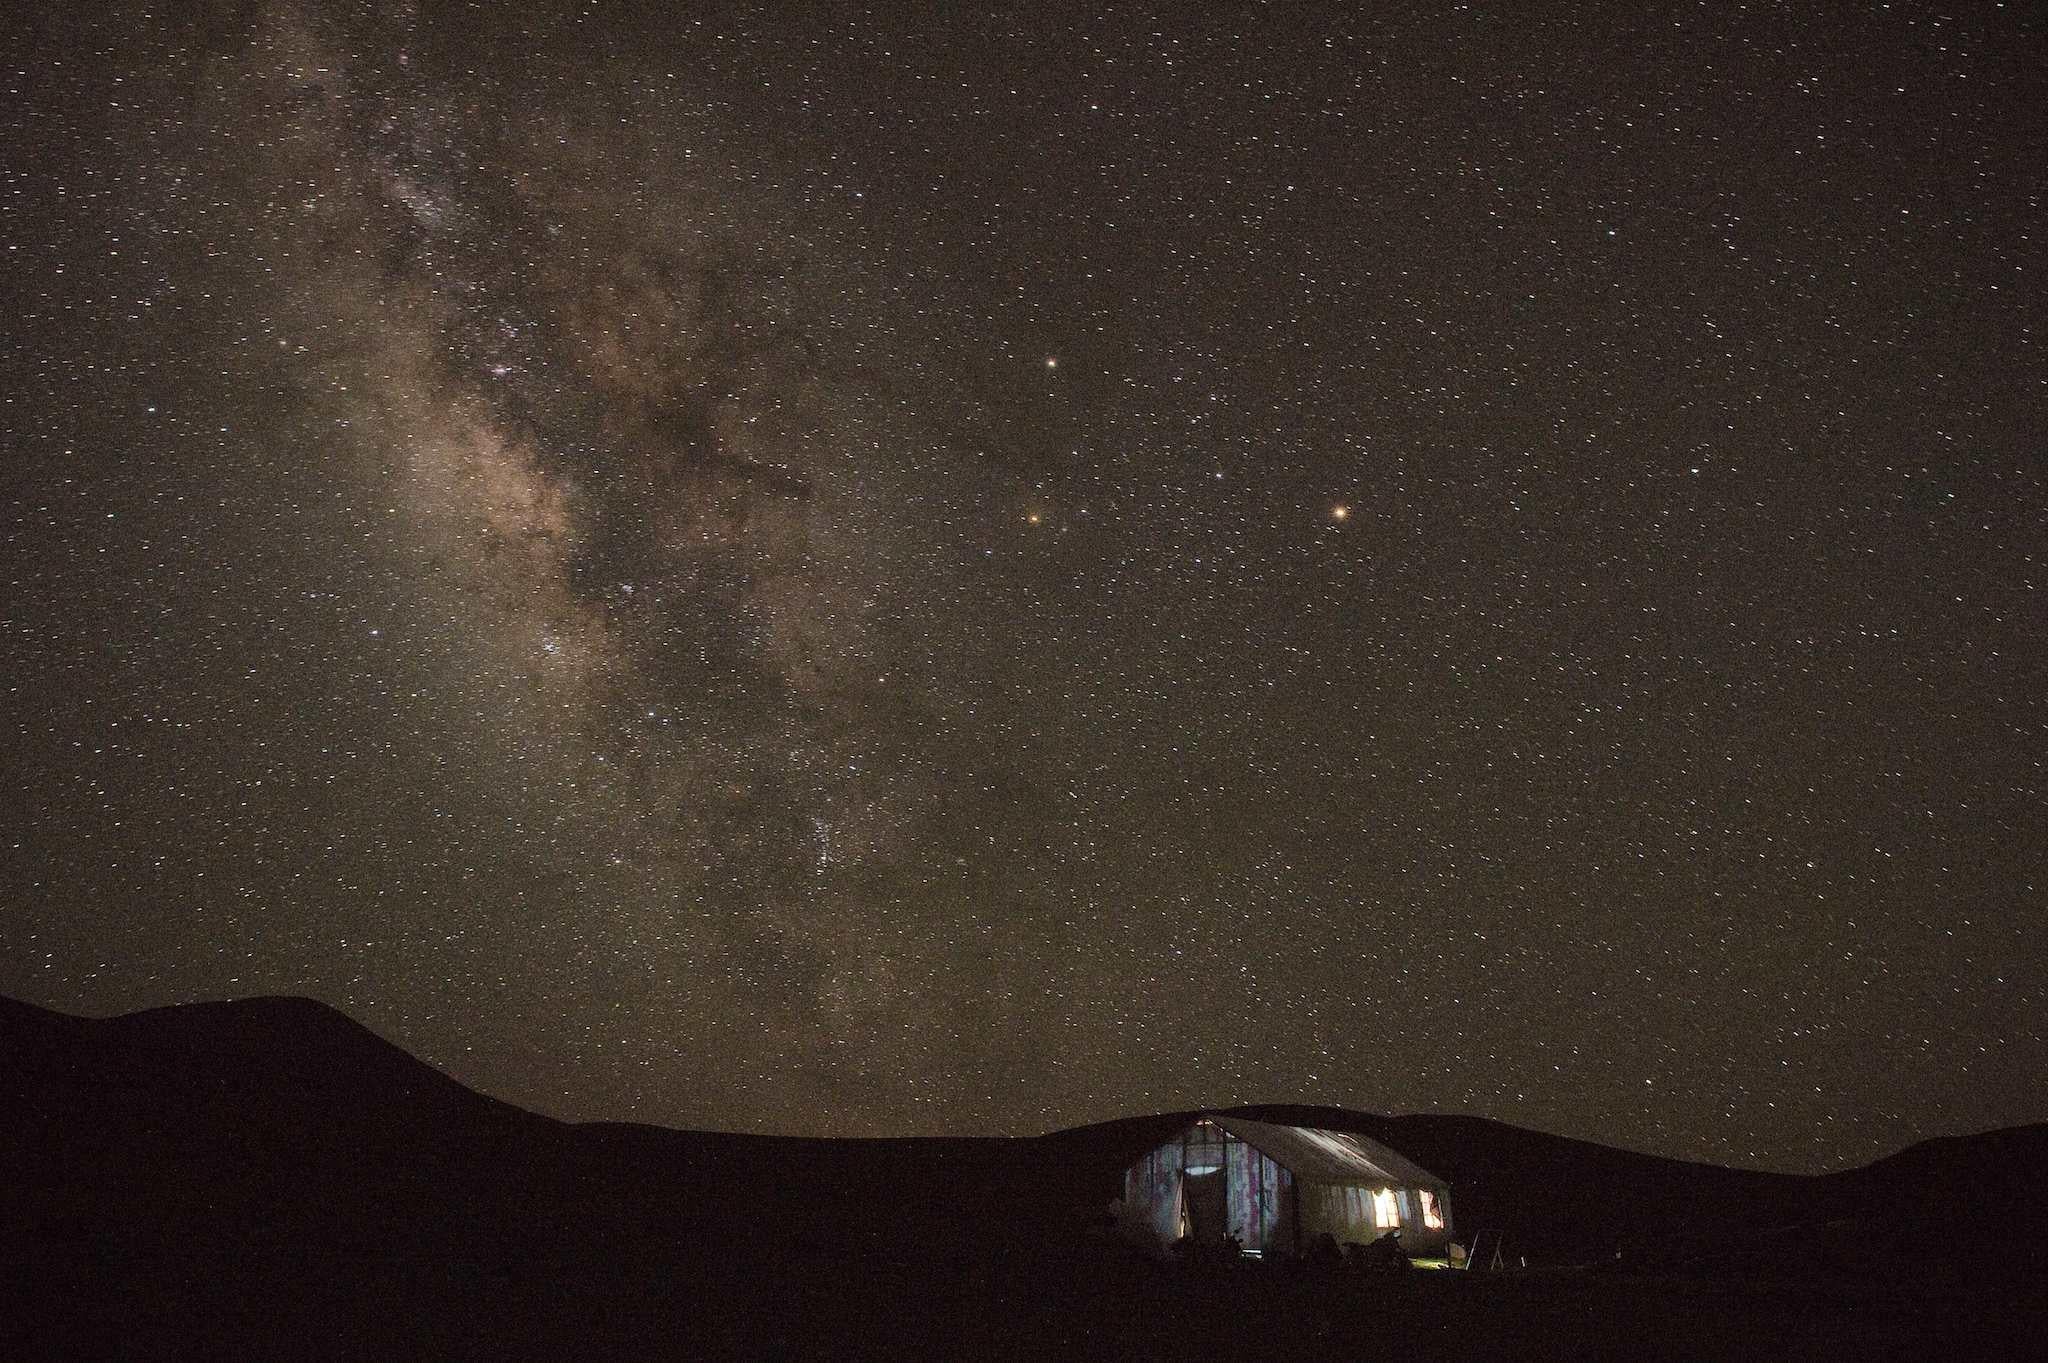 In this picture taken on July 27, 2016, a Tibetan nomad herders tent (bottom R) rests in Yushu county in the mountains of Qinghai province as the Milkyway rises in the night sky